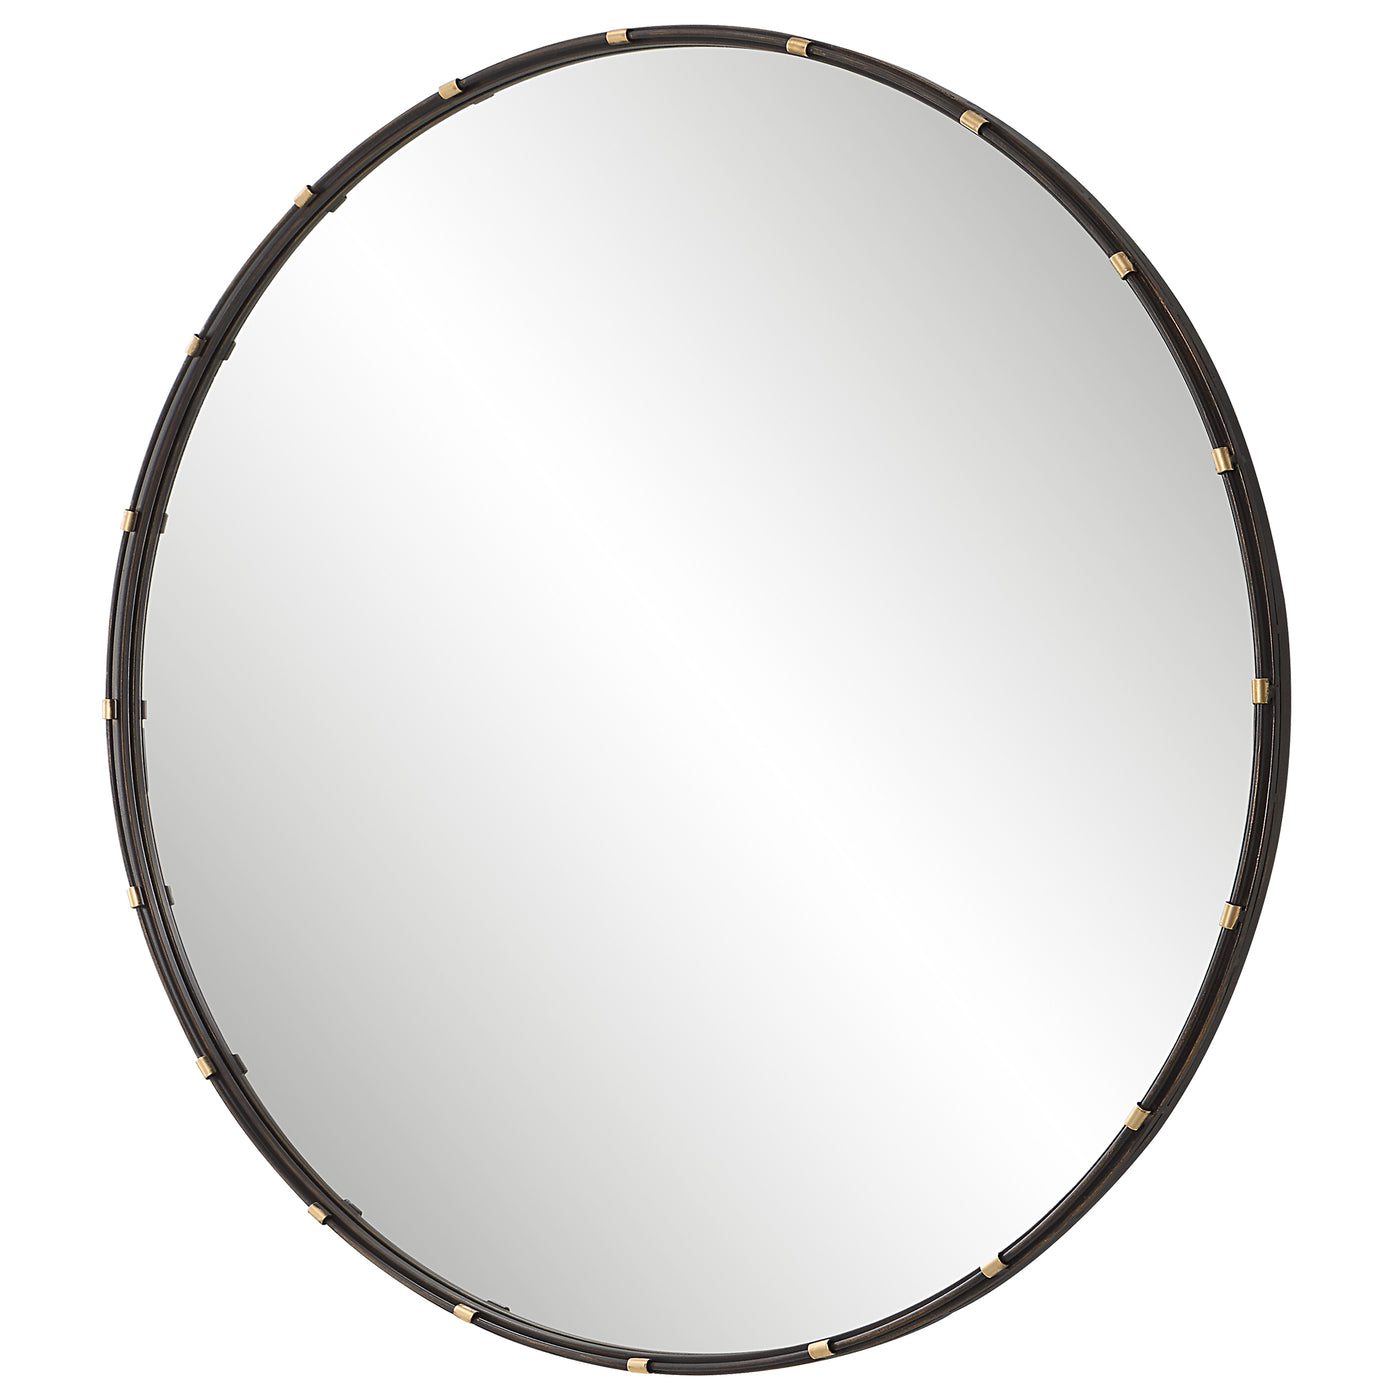 The Cannon Beach - Round Mirror with Black and Gold Frame